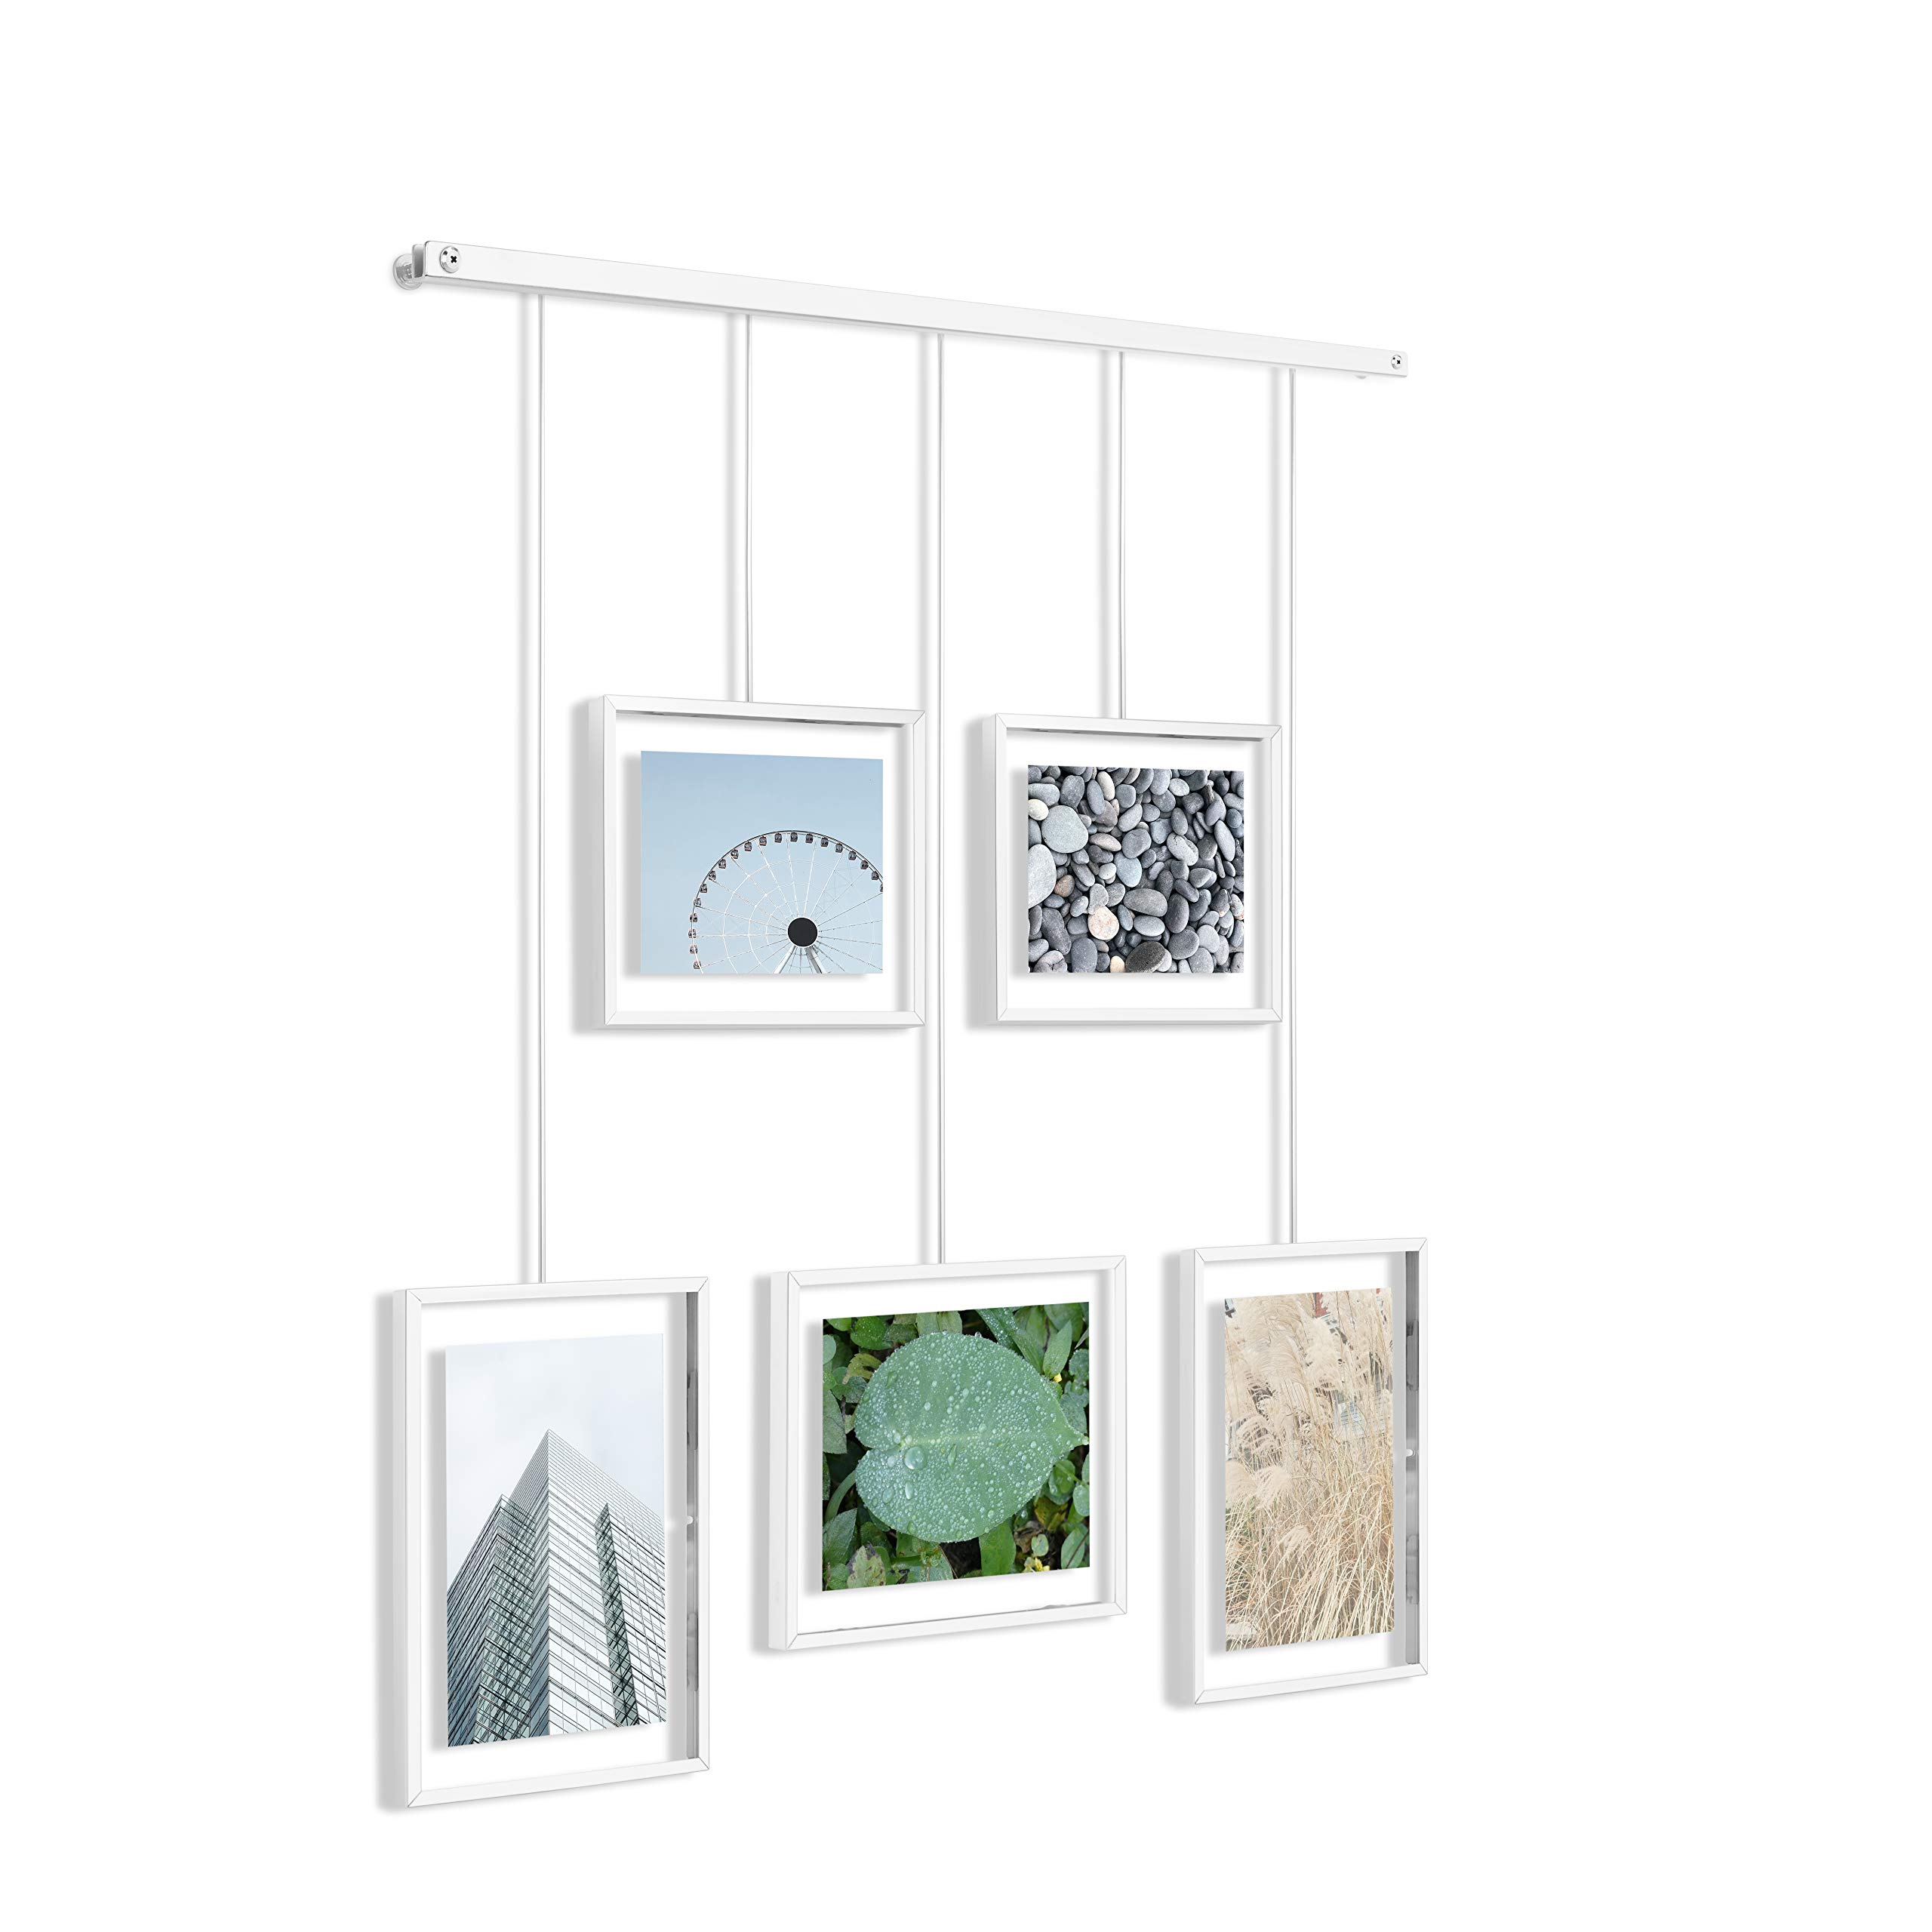 Umbra Exhibit Picture Frame Gallery Set Adjustable Collage Display for 5 Photos, Prints, Artwork & More (Holds Two 4 x 6 inch and Three 5 x 7 inch ...